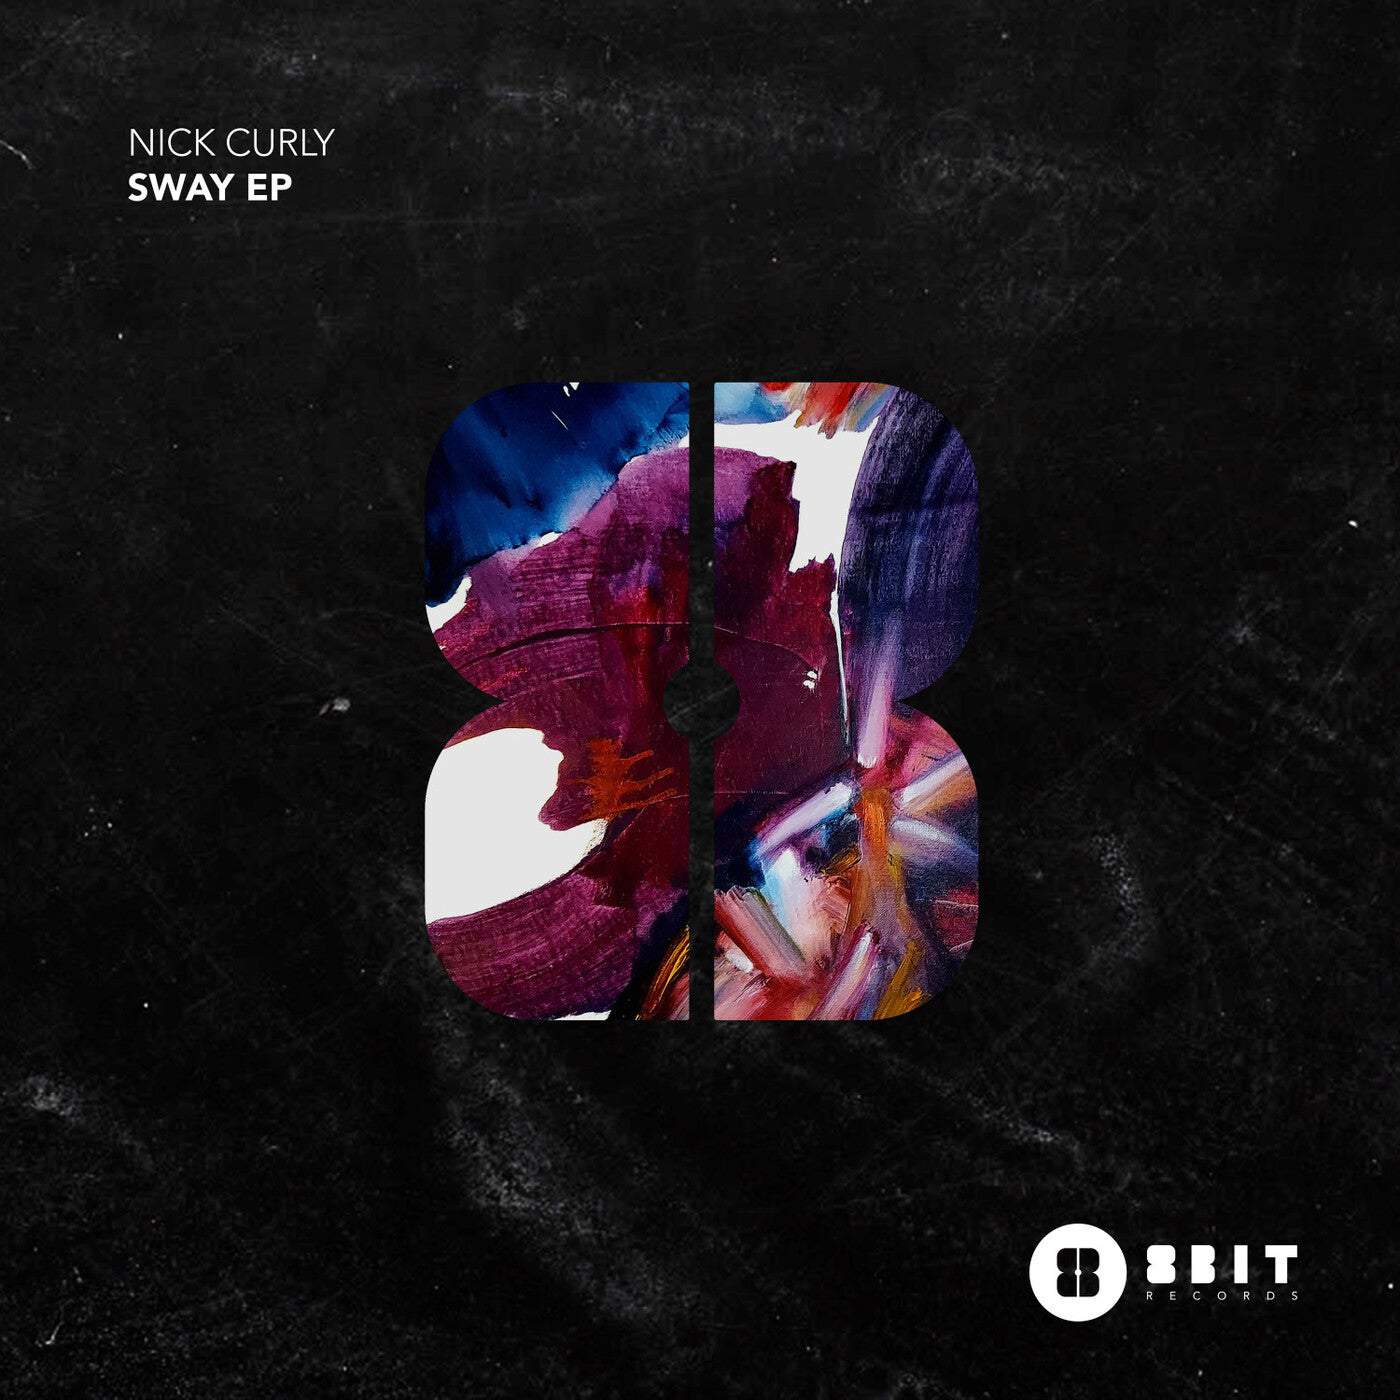 image cover: Nick Curly - Sway EP / 8BIT176